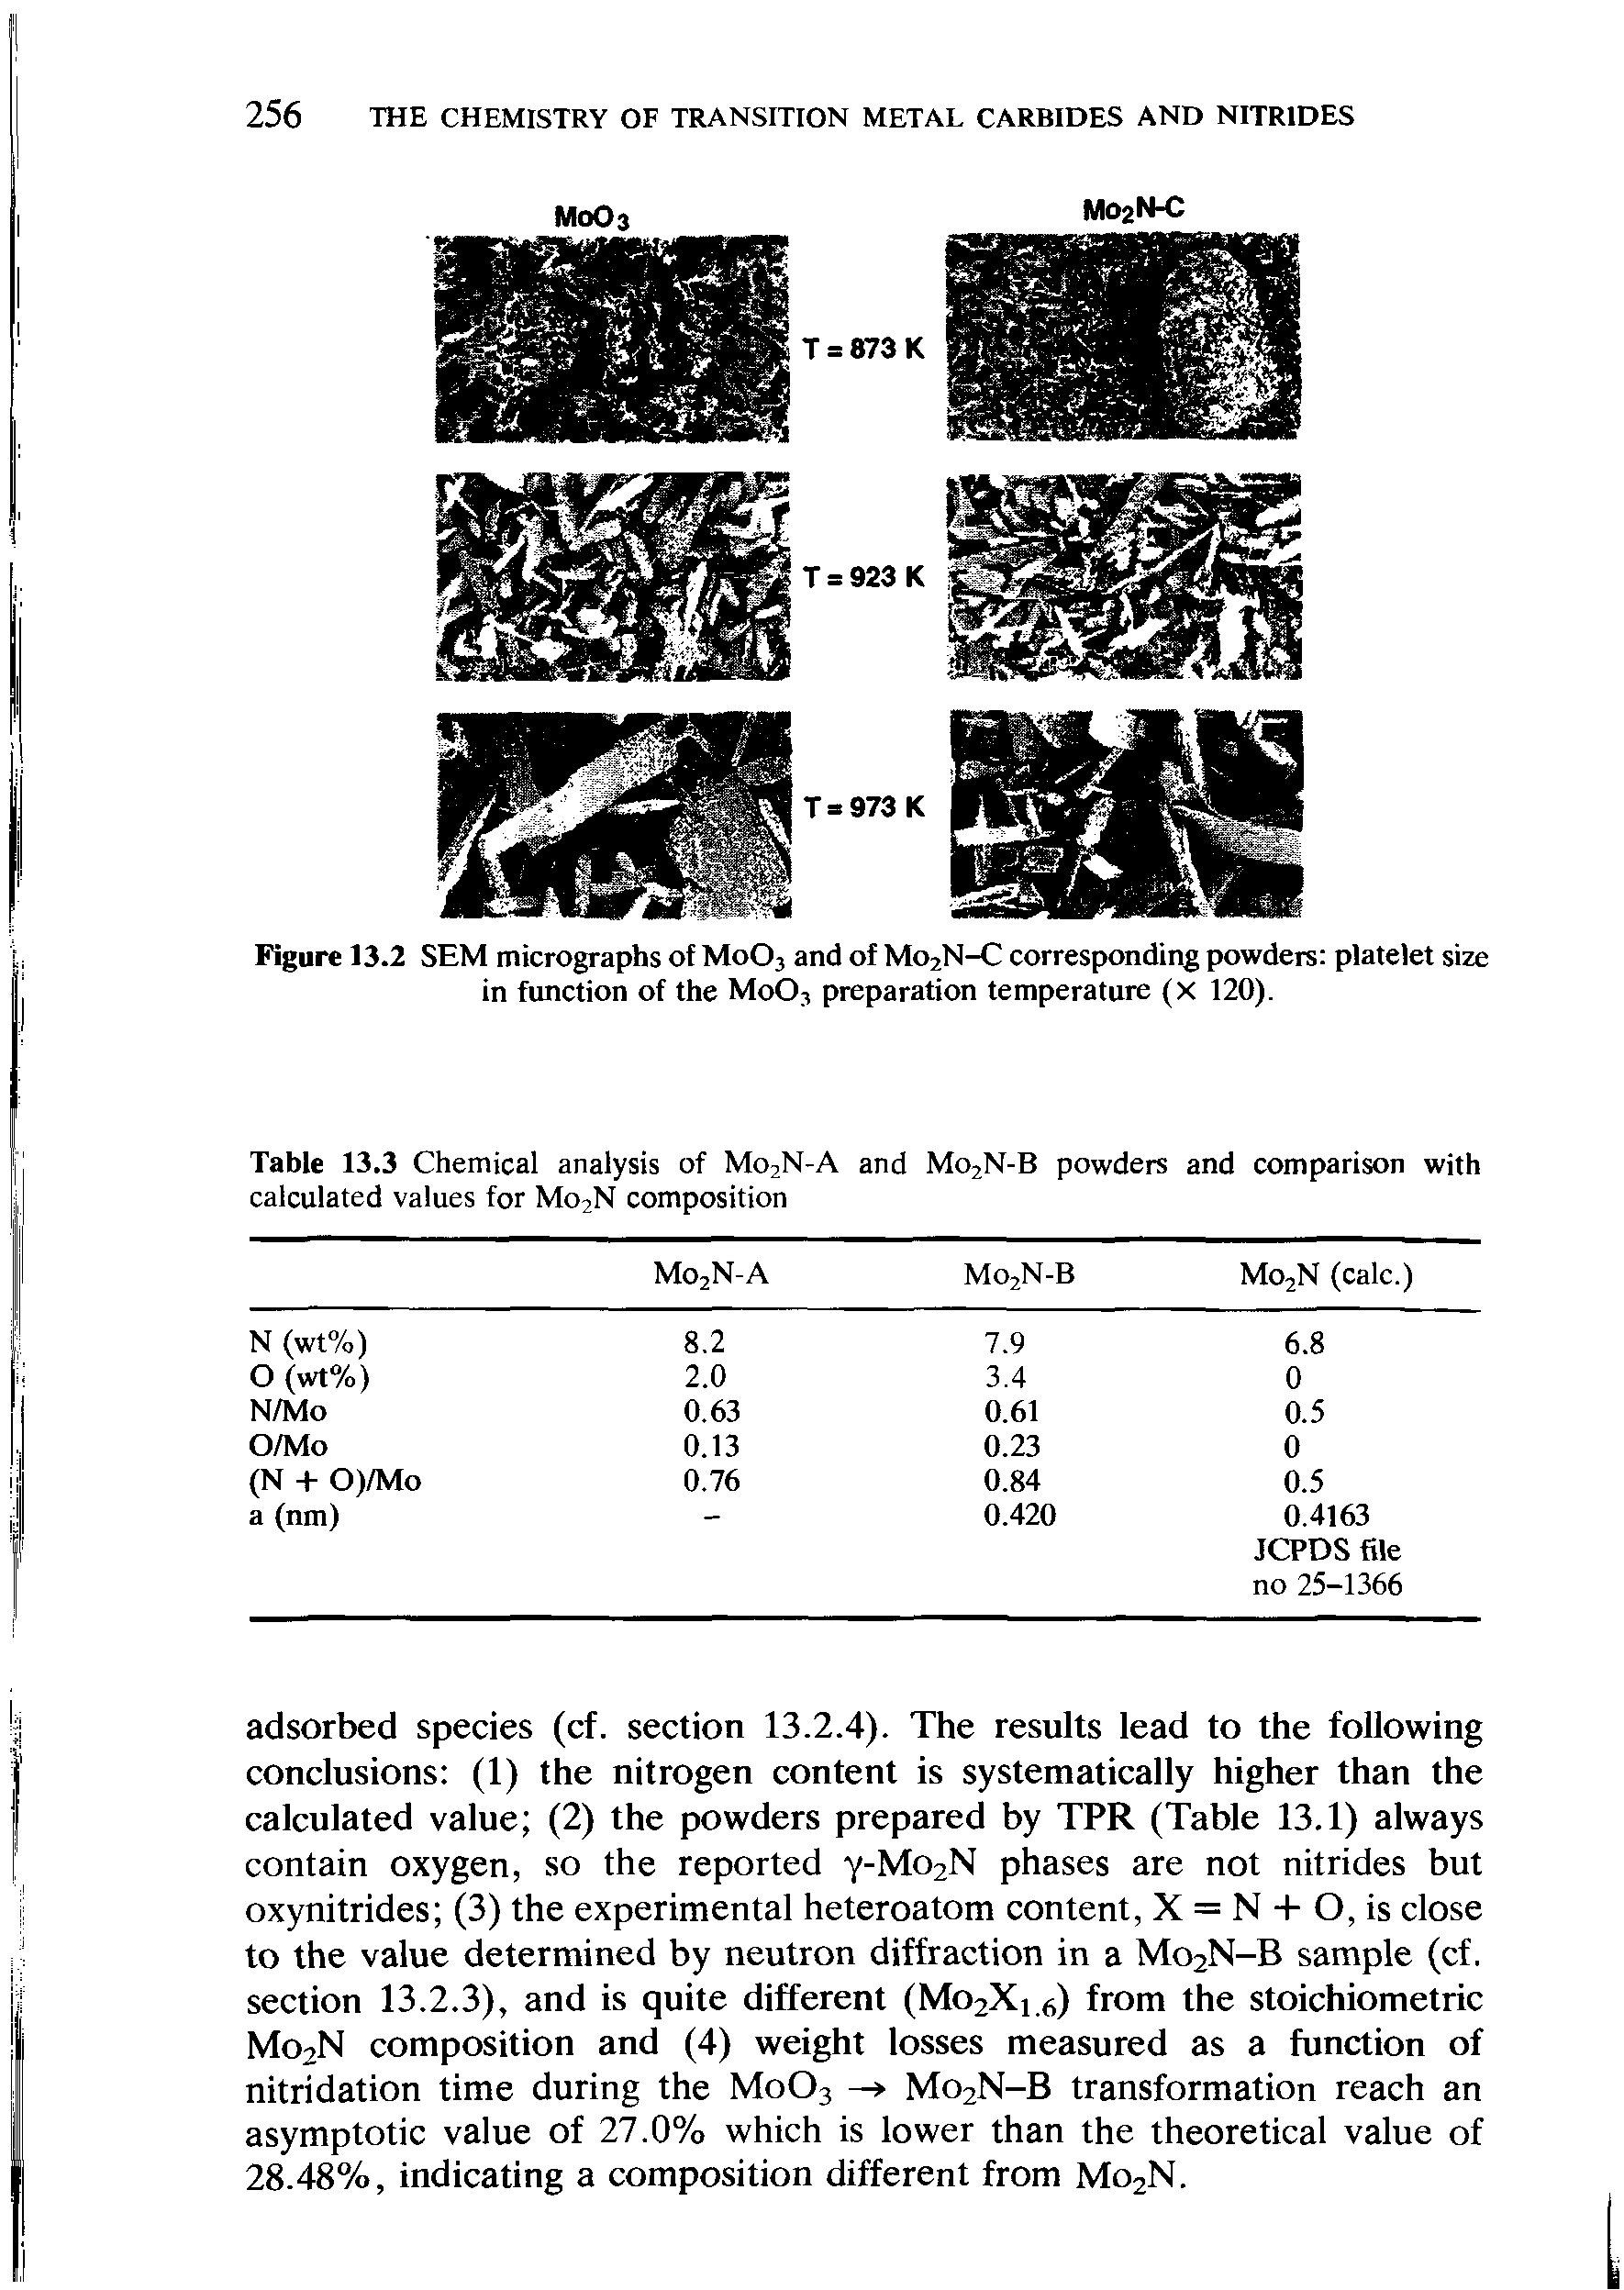 Figure 13.2 SEM micrographs of M0O3 and of Mo2N-C corresponding powders platelet size in function of the Mo03 preparation temperature (x 120).